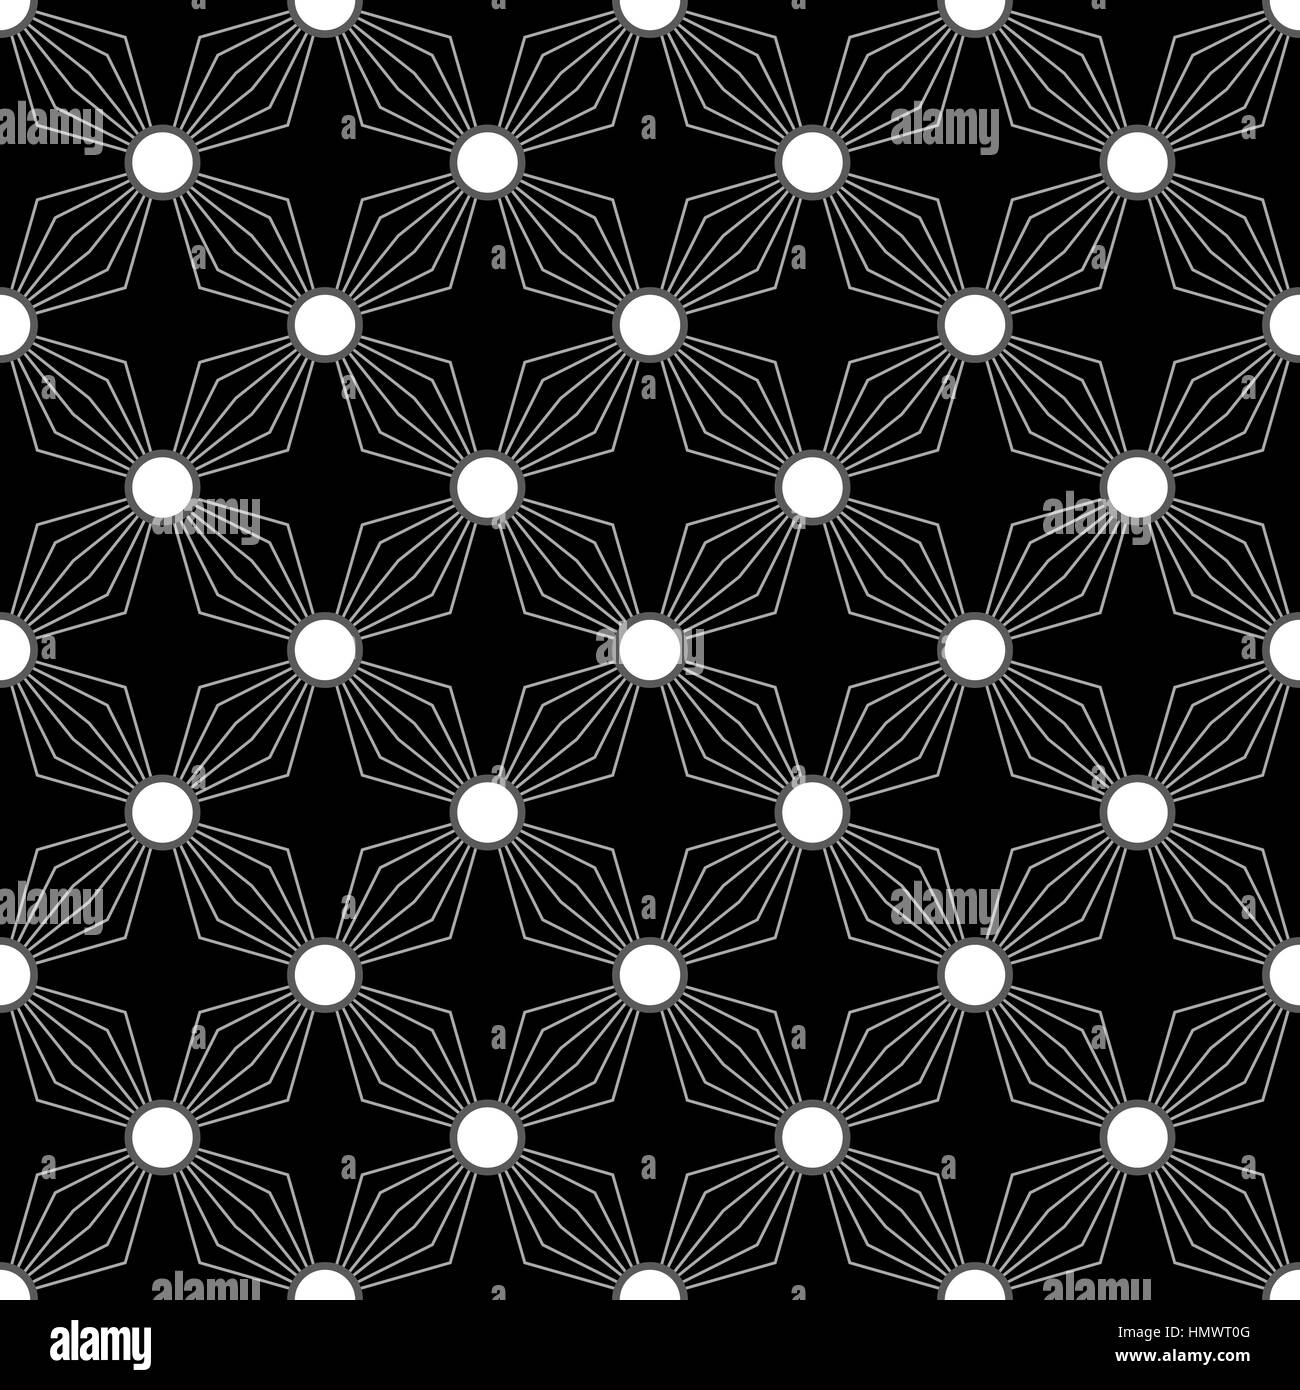 Simple diamond petal pattern in a square matrix layout with glowing dots - seamless editable repeating vector background wallpaper Stock Vector